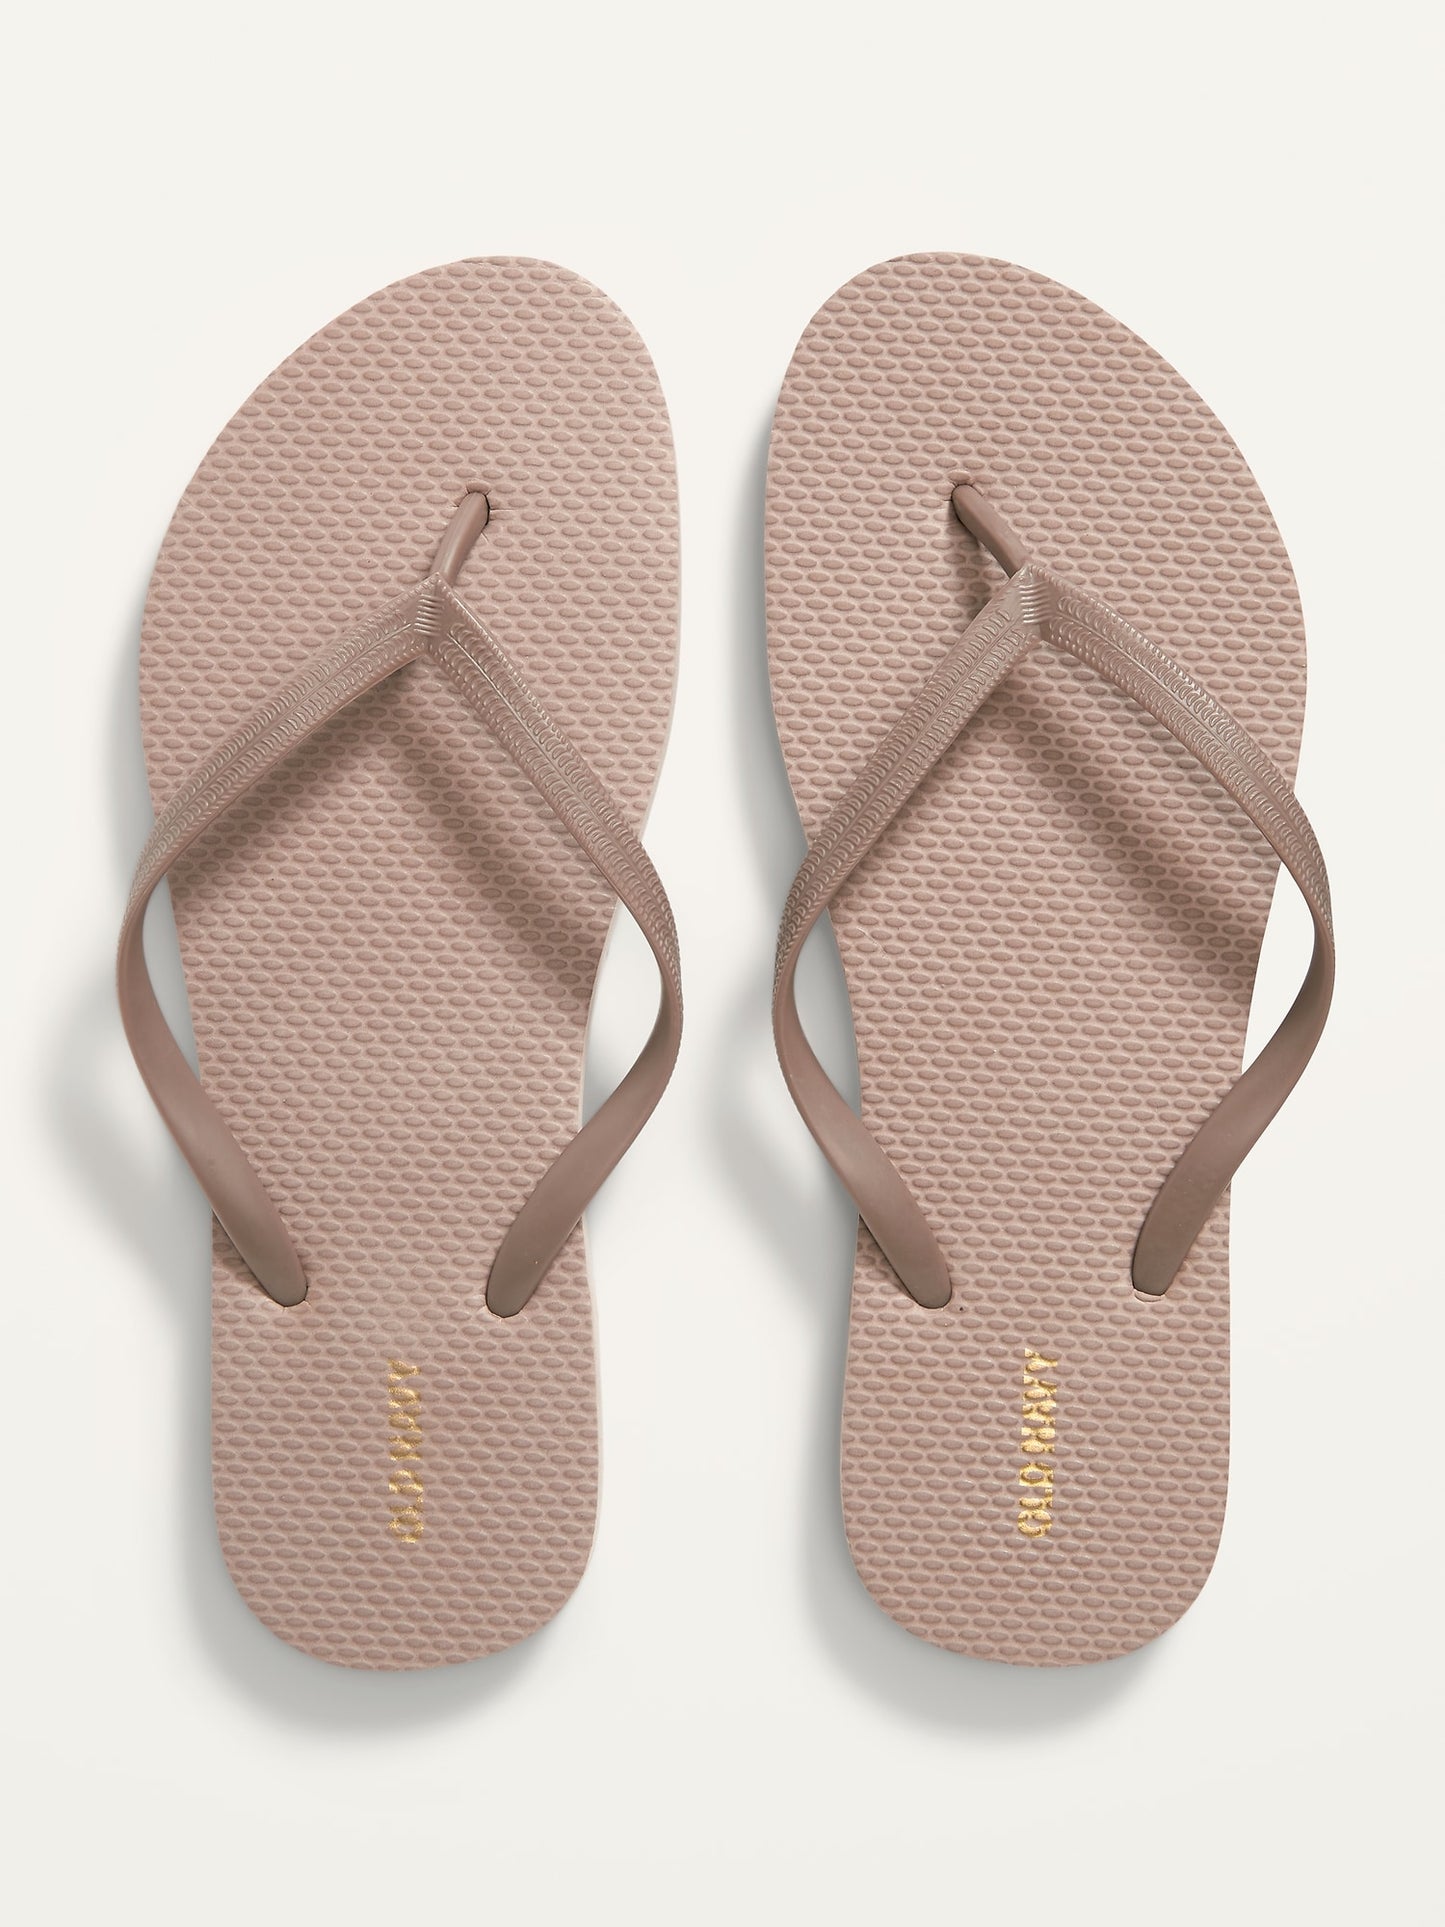 ON Plant-Based Flip-Flop Sandals For Women - Taupe